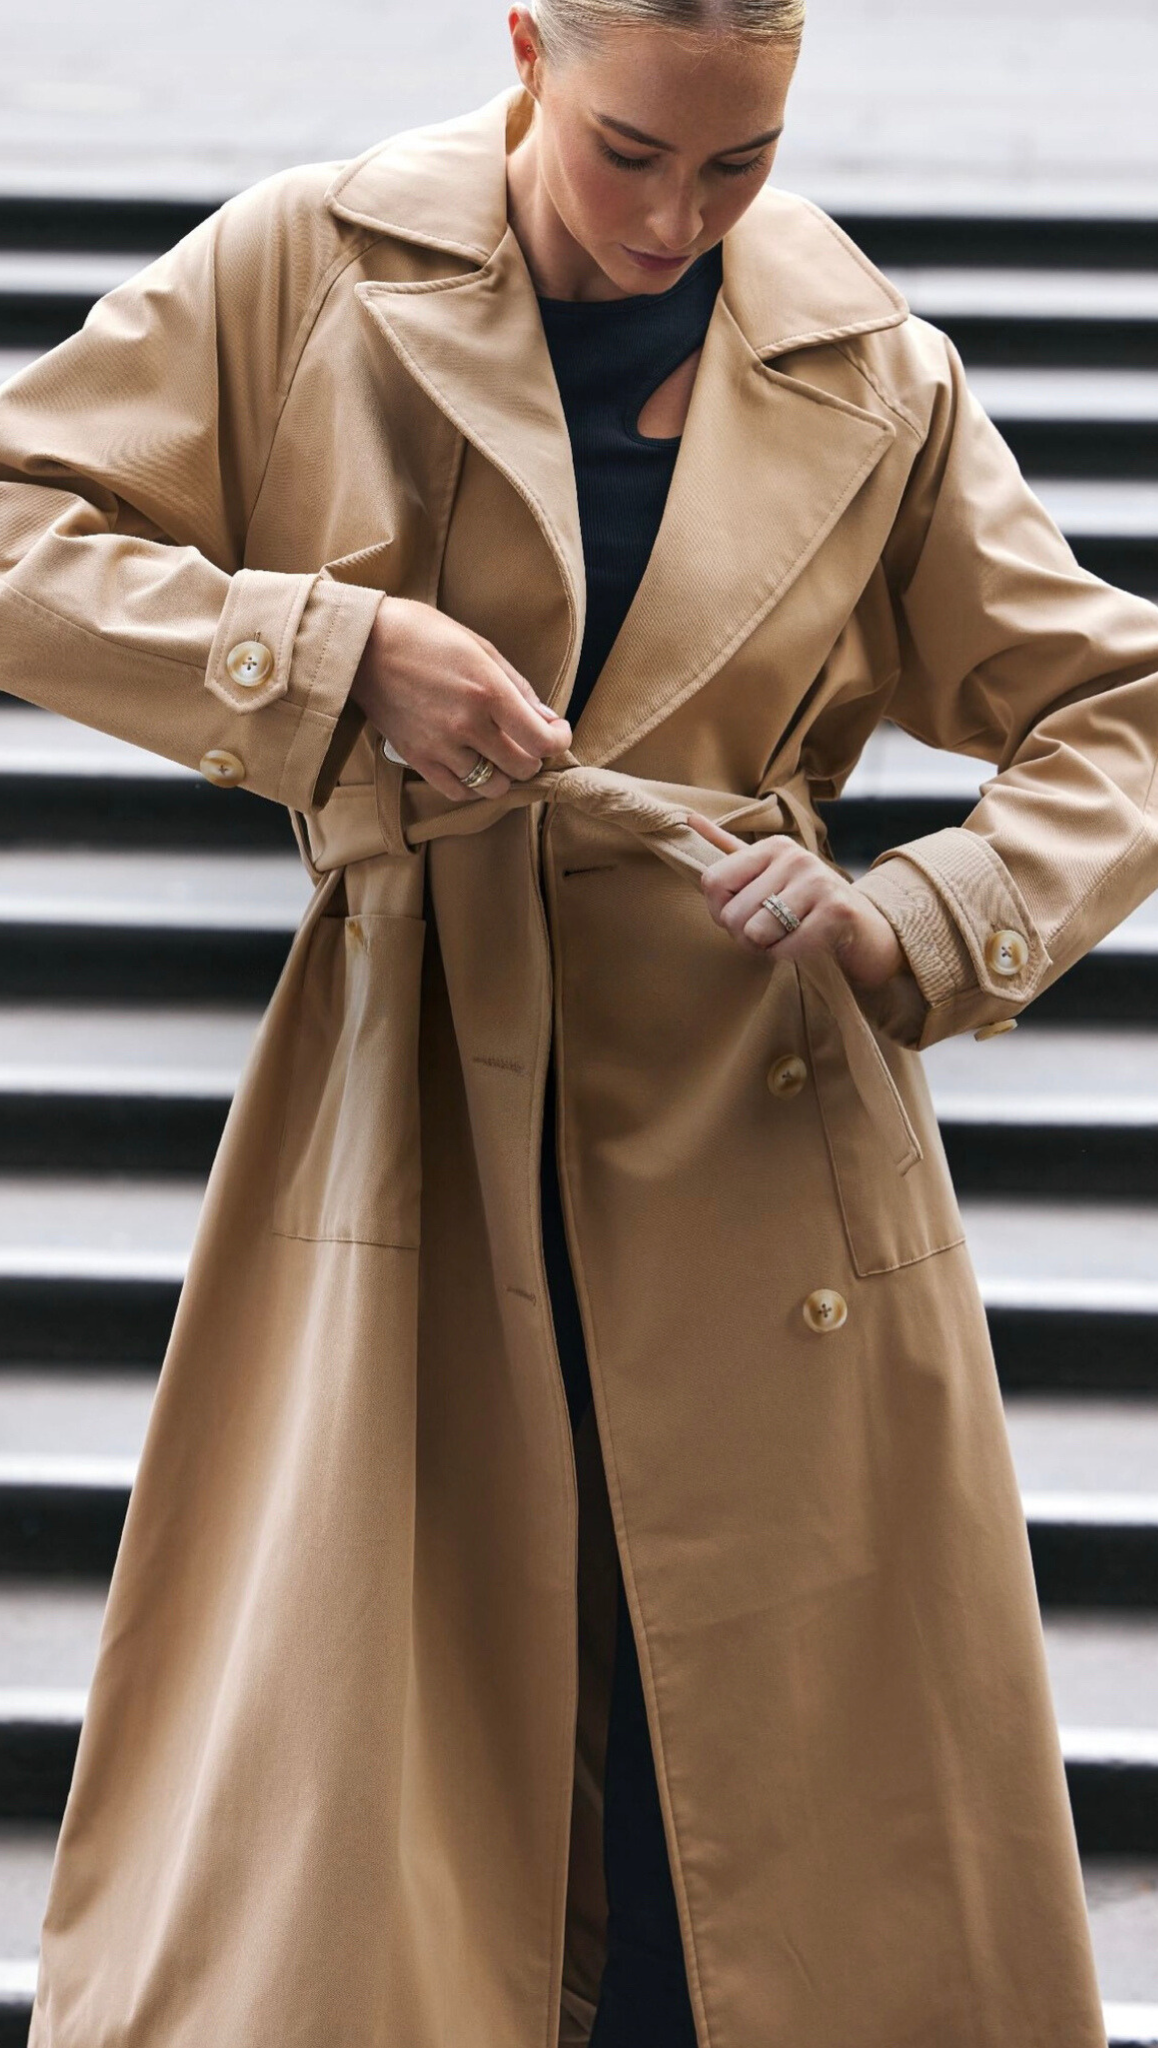 Ena Pelly | Carrie Trench Coat - Camel